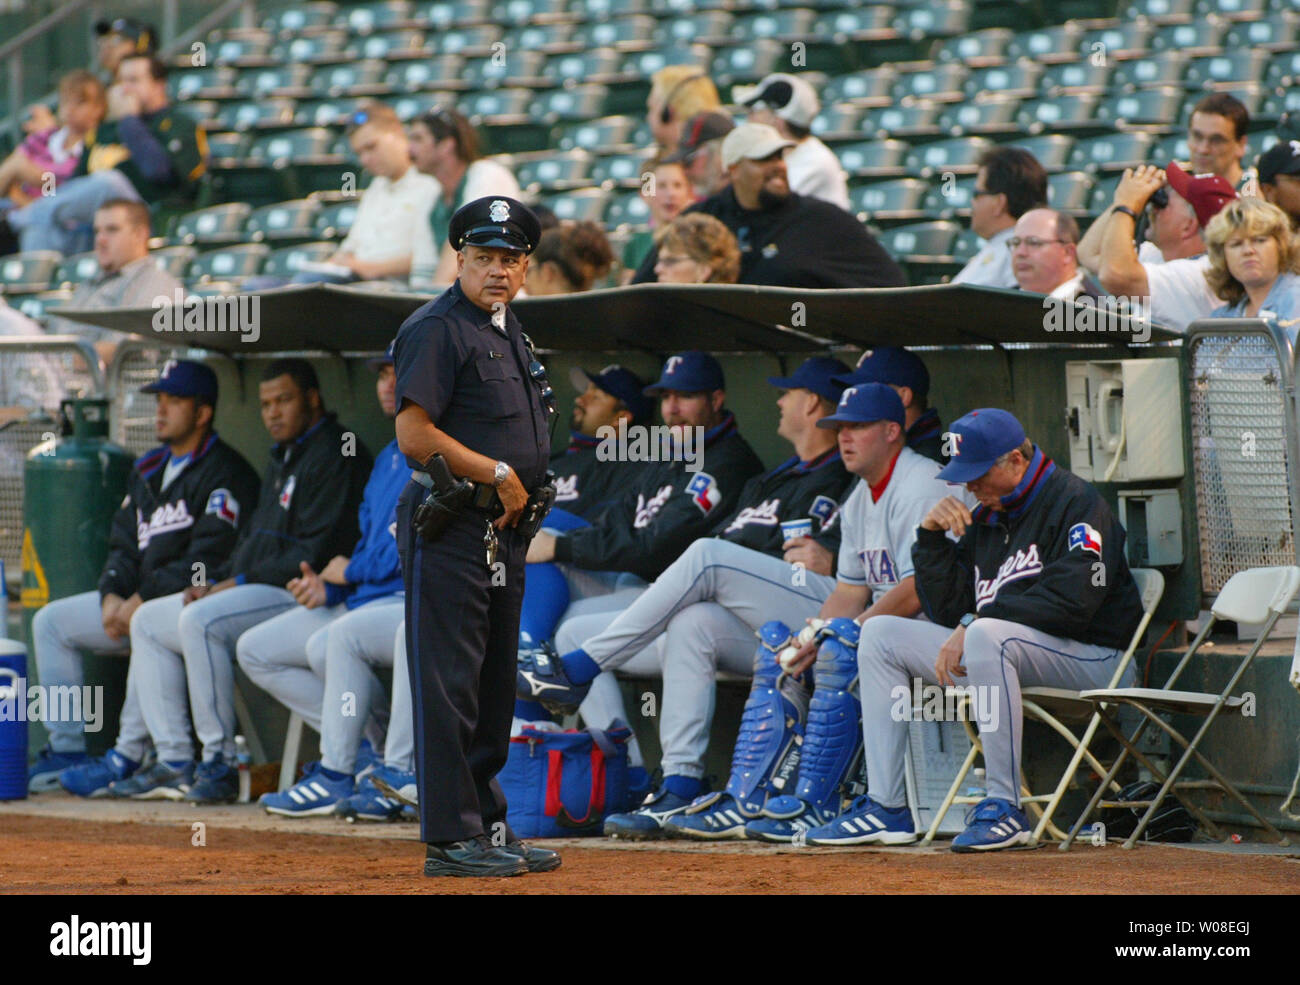 Oakland Police officer Rudy Villegas stands guard by  the Texas Rangers bullpen during a game against the Oakland Athletics on September 14, 2004 in Oakland, CA. Extra security was added to the game after an altercation the night before between Rangers players and fans saw a chair thrown, a fan bloodied and Texas Rangers relief pitcher Frank Francisco  booked by the Oakland Police for aggravated battery.  (UPI Photo/Bruce Gordon) Stock Photo